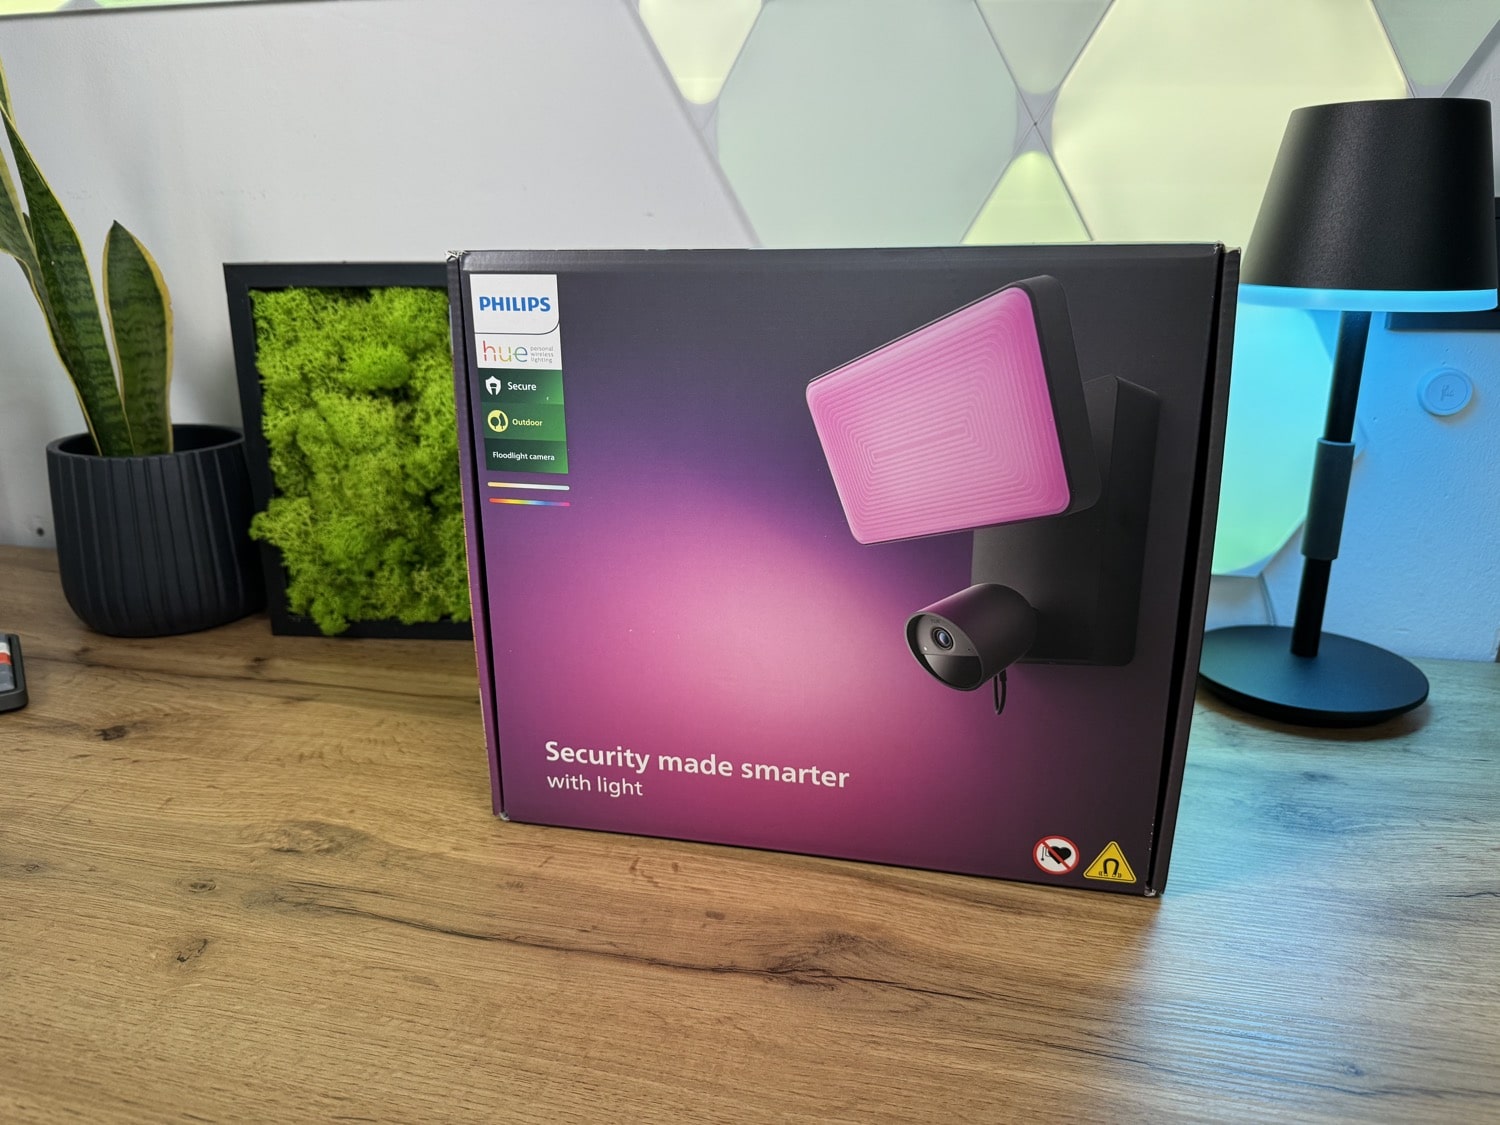 Hueblog: Unboxing: The new Philips Hue Secure floodlight camera